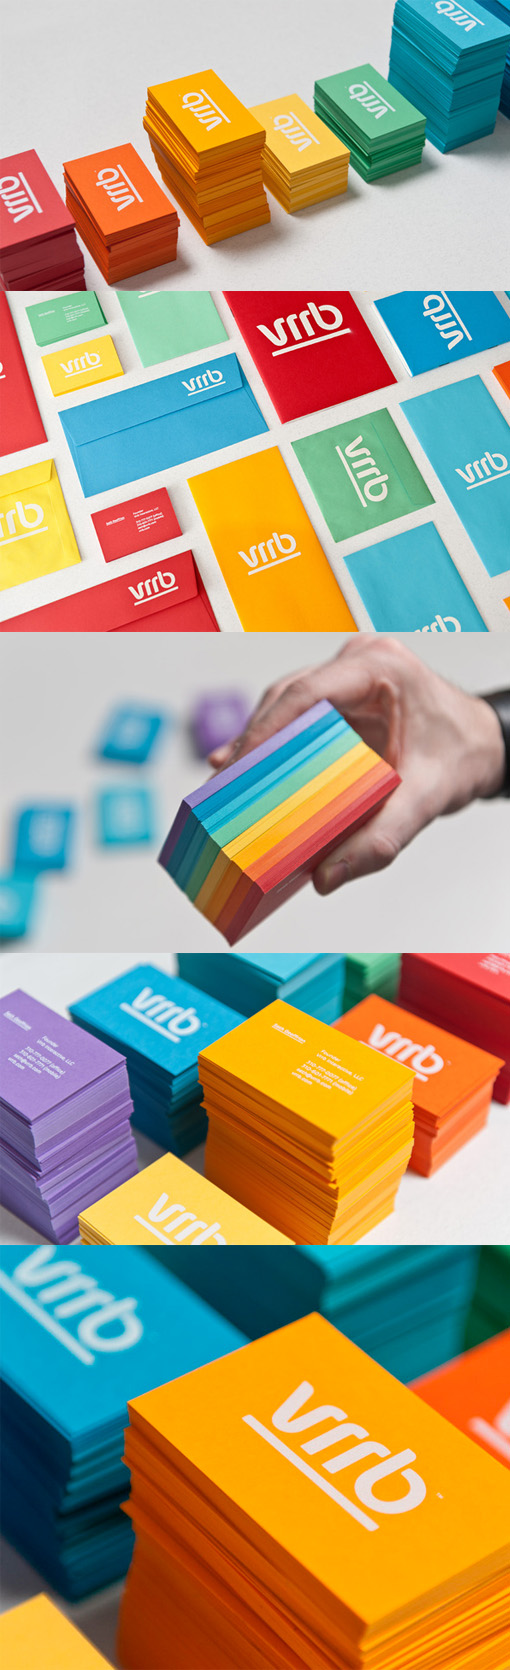 Custom Typography On A Colourful Set Of Business Cards For A Web Development Studio